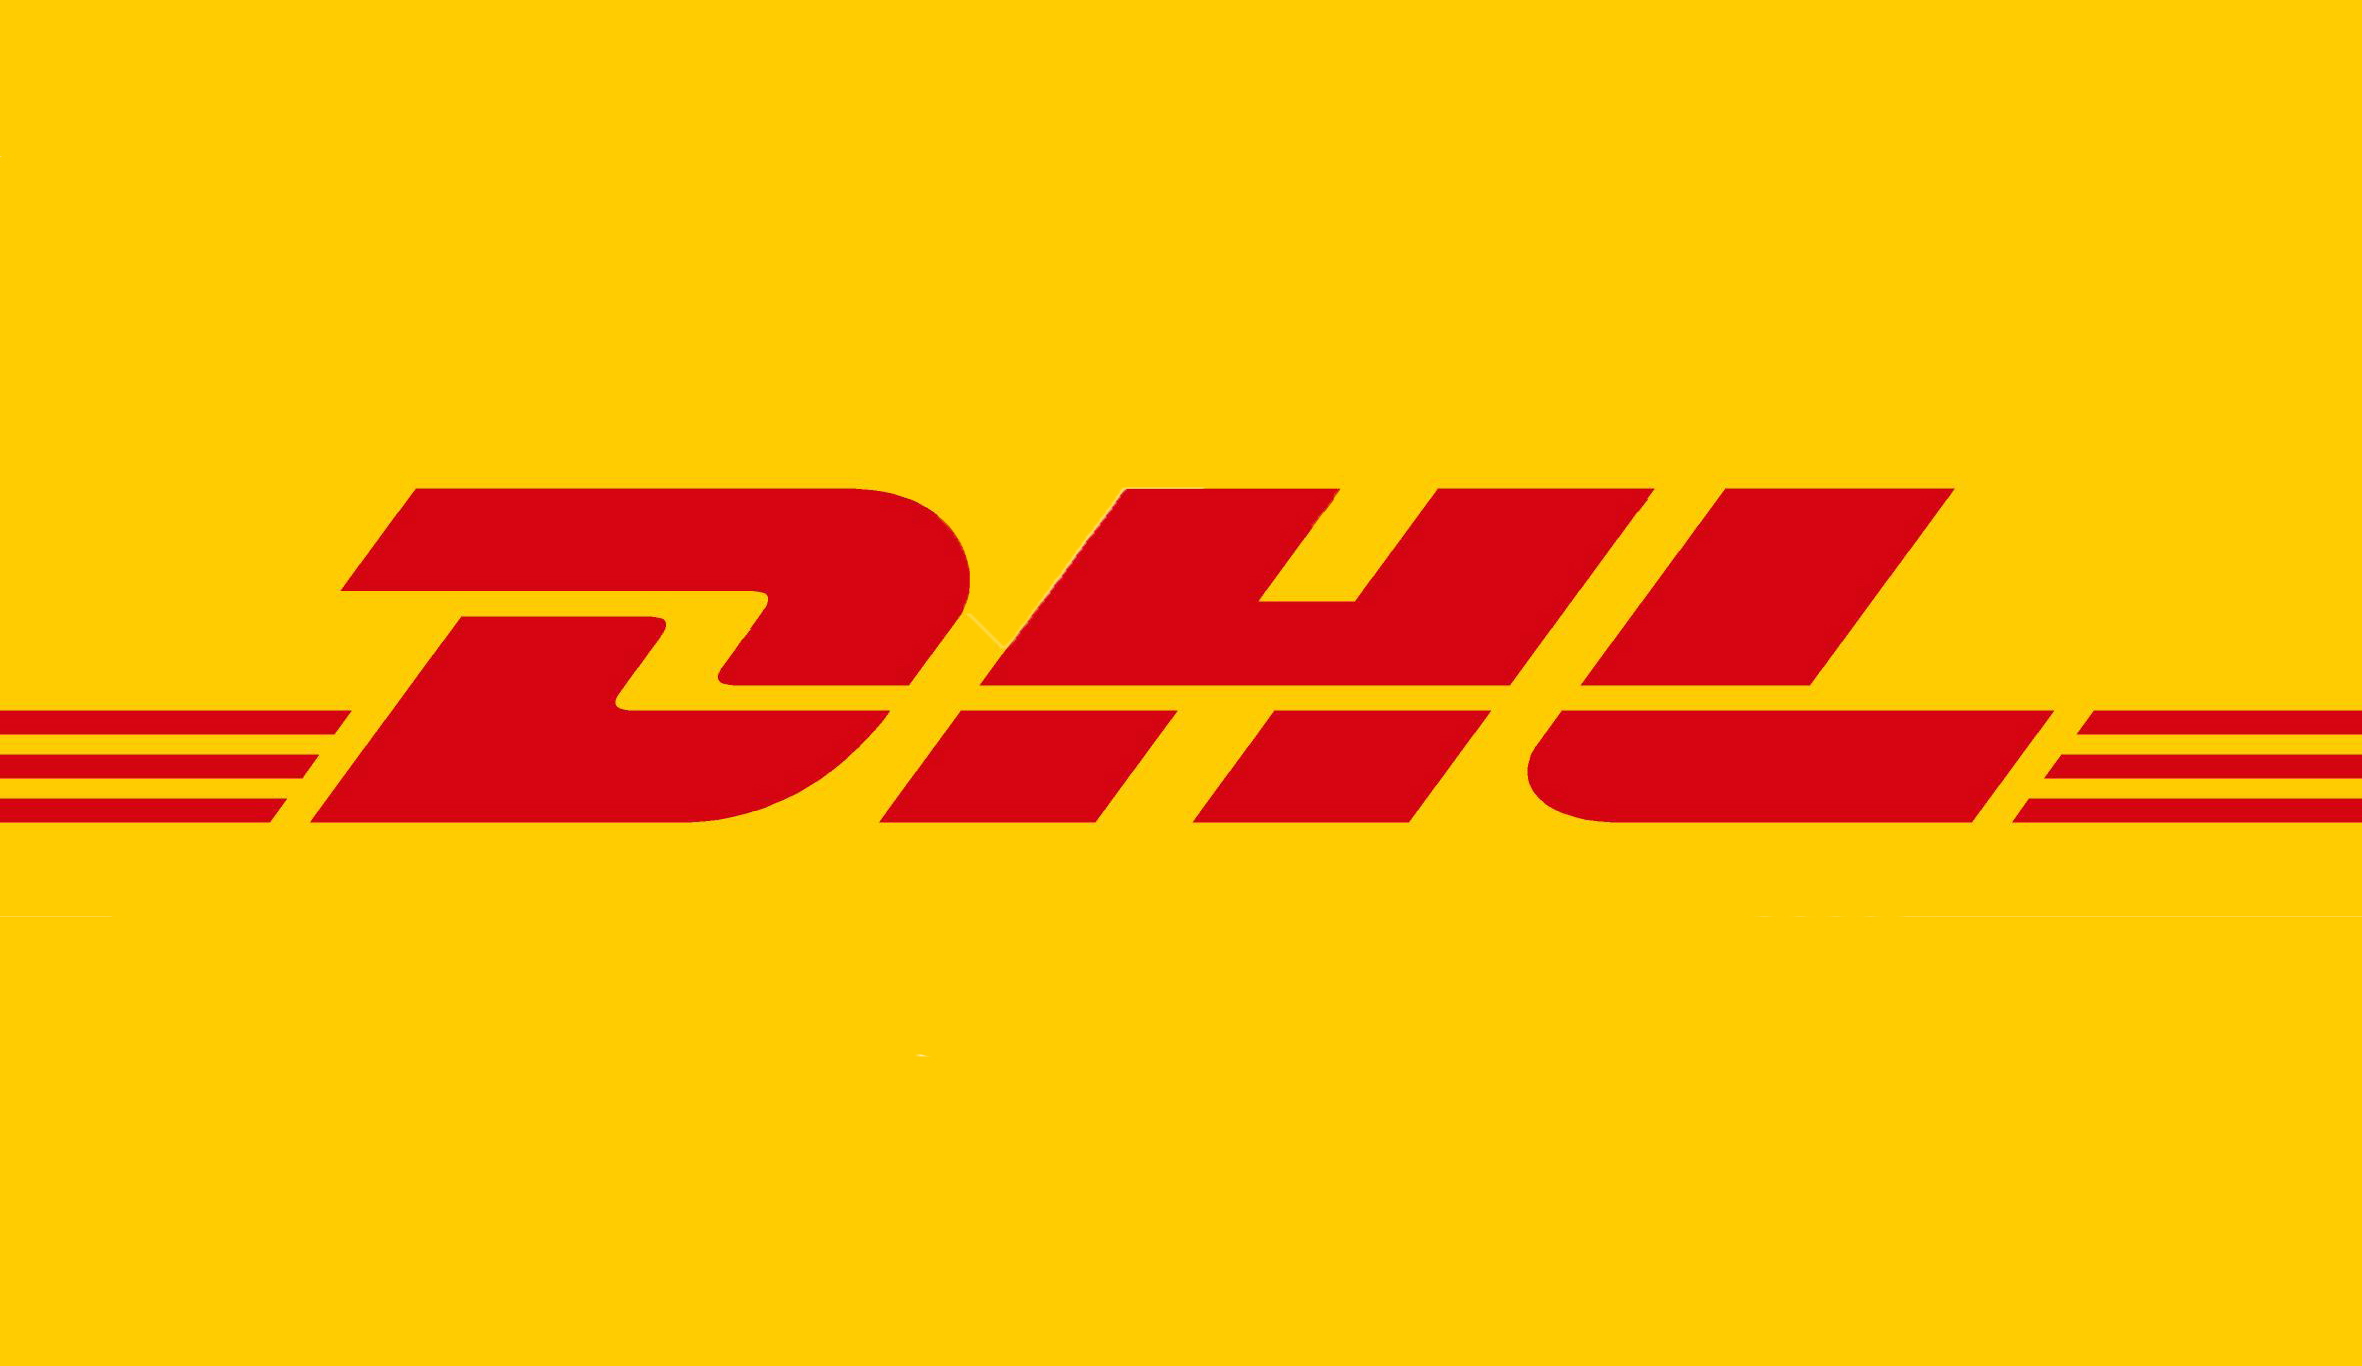 Download Wallpaper Dhl - Dhl Courier Service , HD Wallpaper & Backgrounds